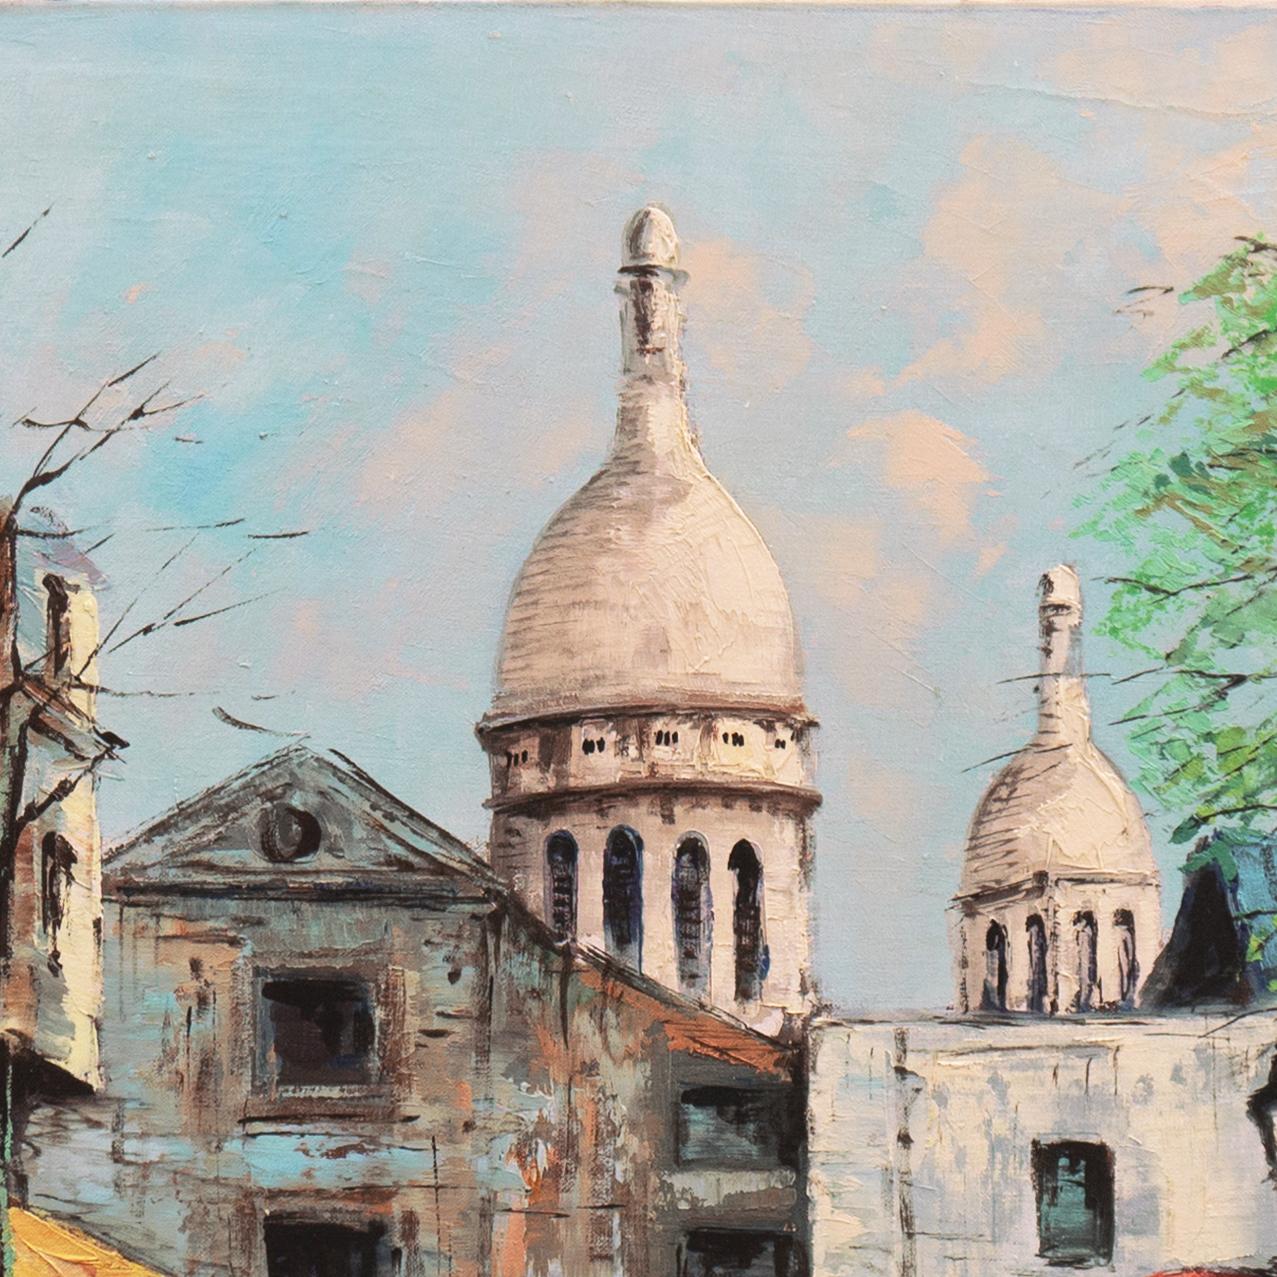 Signed lower left, 'C. de Bruck' (?) and painted circa 1965.

A view of the Place du Tertre in Montmartre with new, spring growth on the trees and various elegant figures shown walking and seated beneath a cafe shade-umbrella with a view beyond